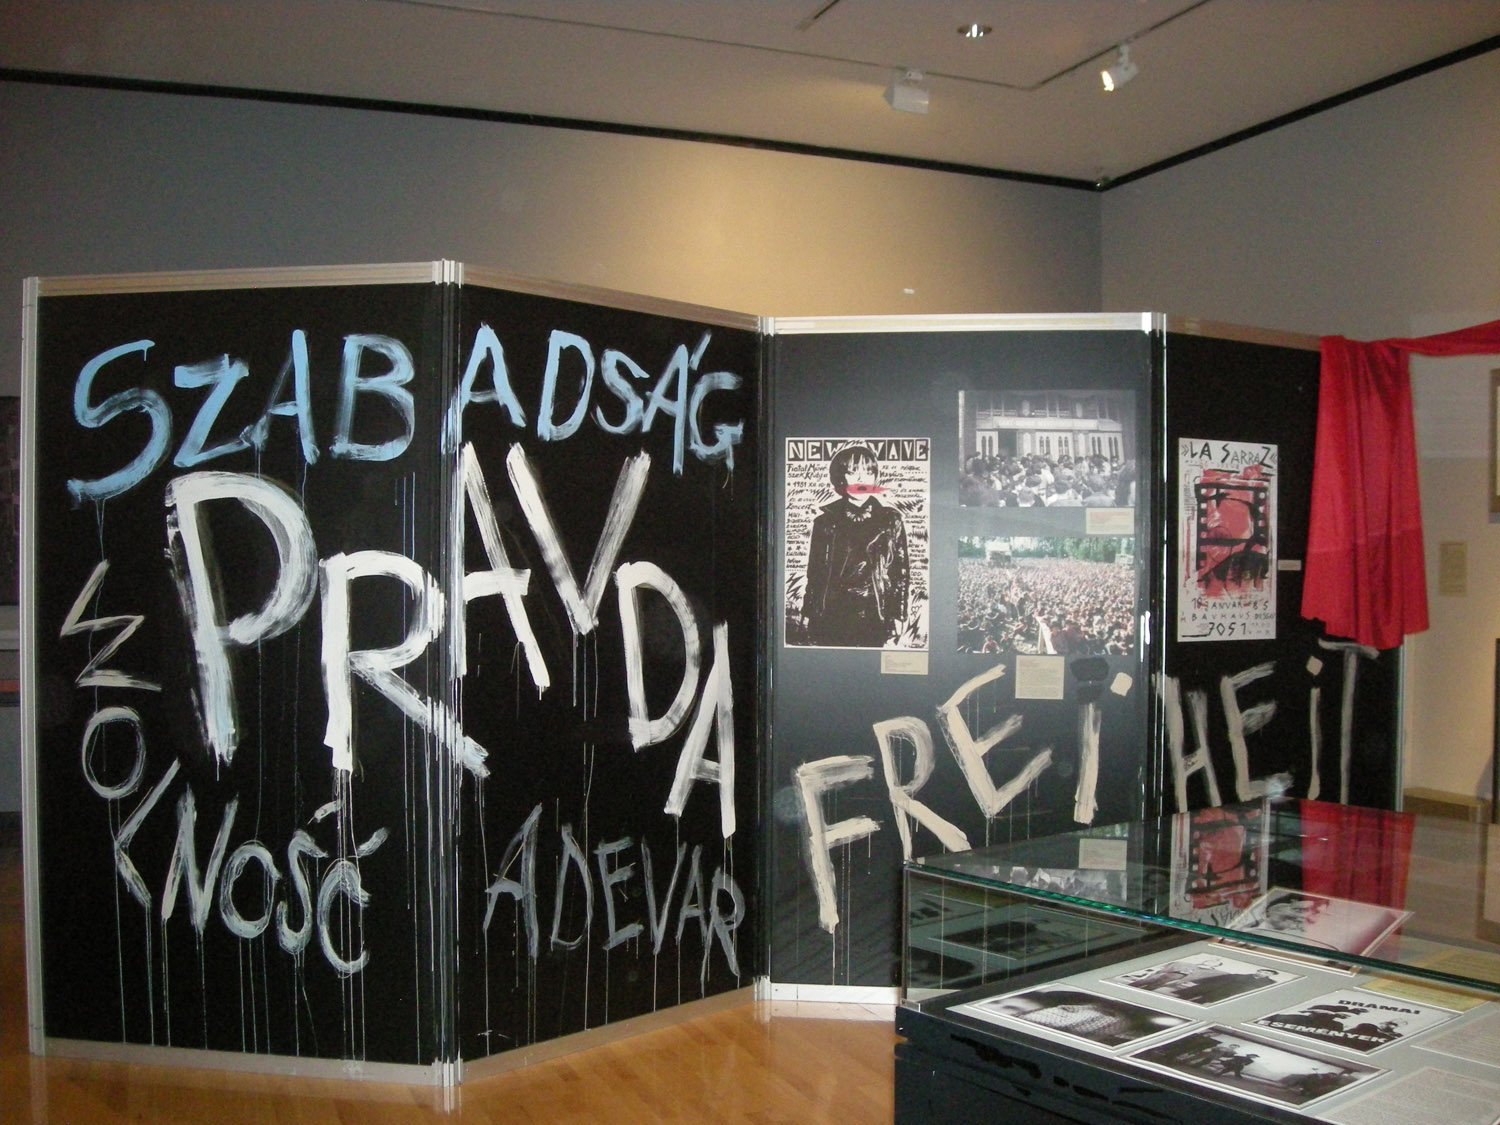 Exhibition view of Revolutionary Voices: Performing Arts in Central & Eastern Europe in the 1980s, The New York Public Library for the Performing Arts, 2009